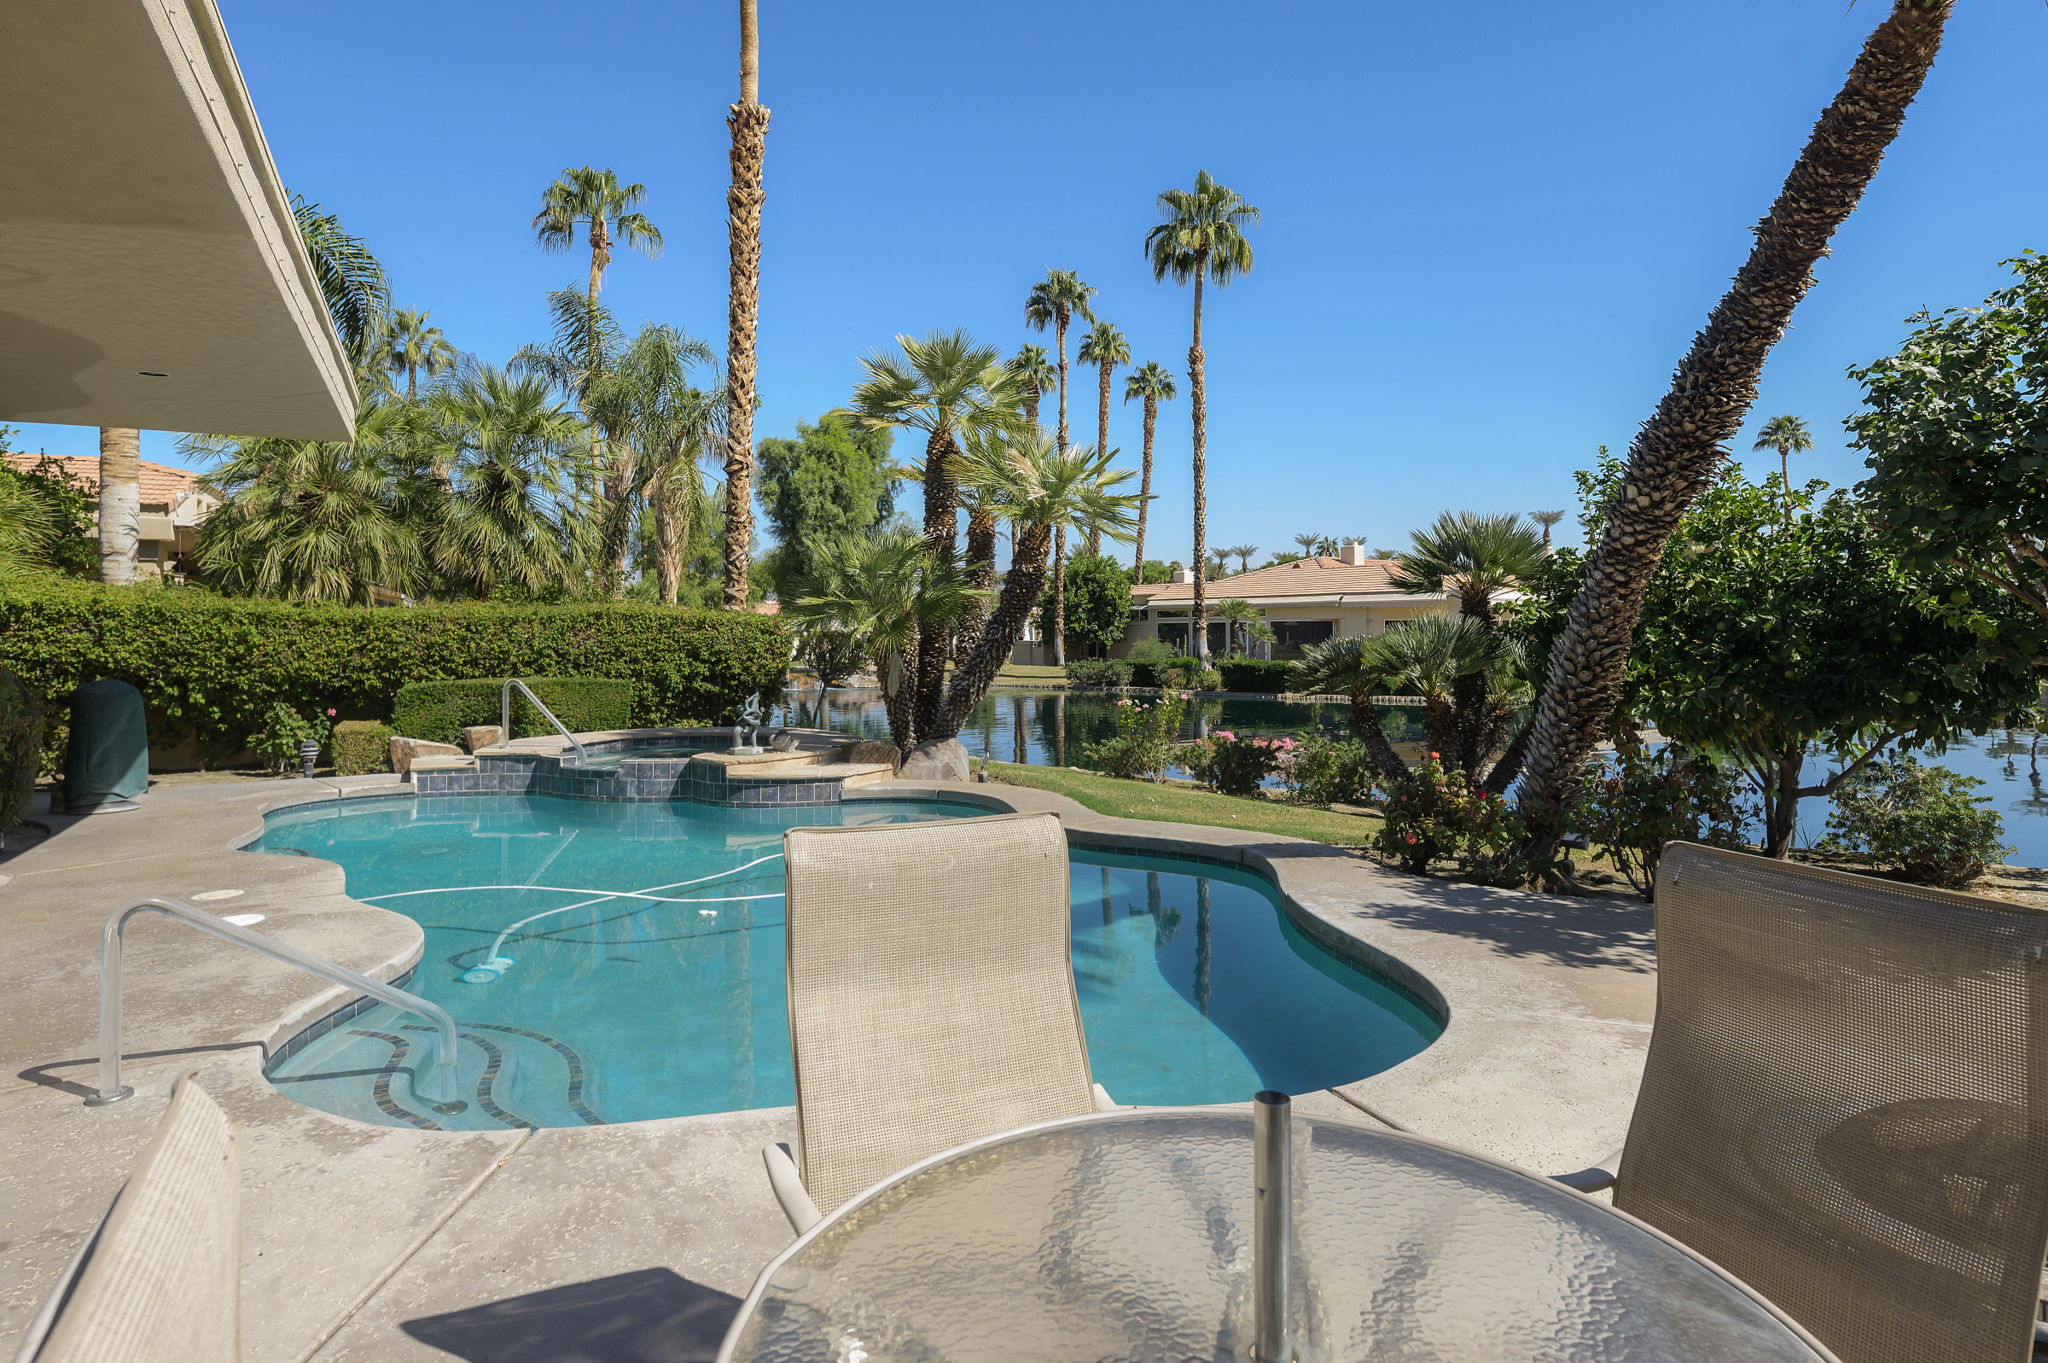  44880 Lakeside Dr, Indian Wells, CA 92210, US Photo 30